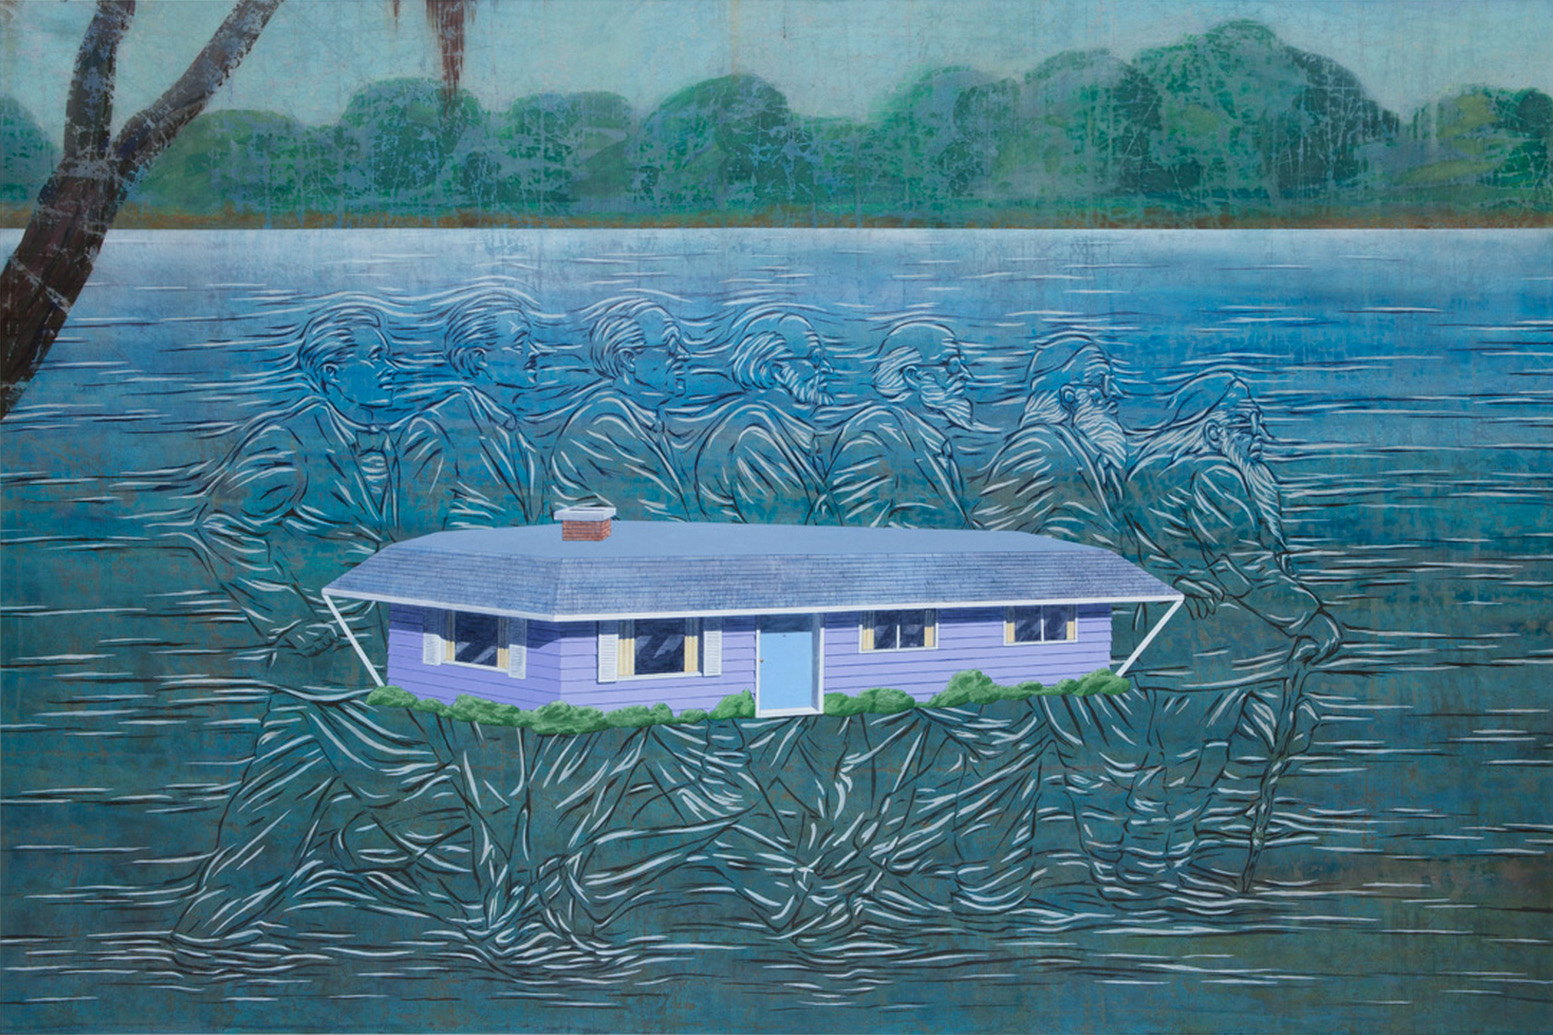 Jim Shaw, <em>The House in Mississippi</em>, 2013. Acrylic on muslin, 72 x 108 inches. Courtesy of the artist and Blum & Poe, Los Angeles.